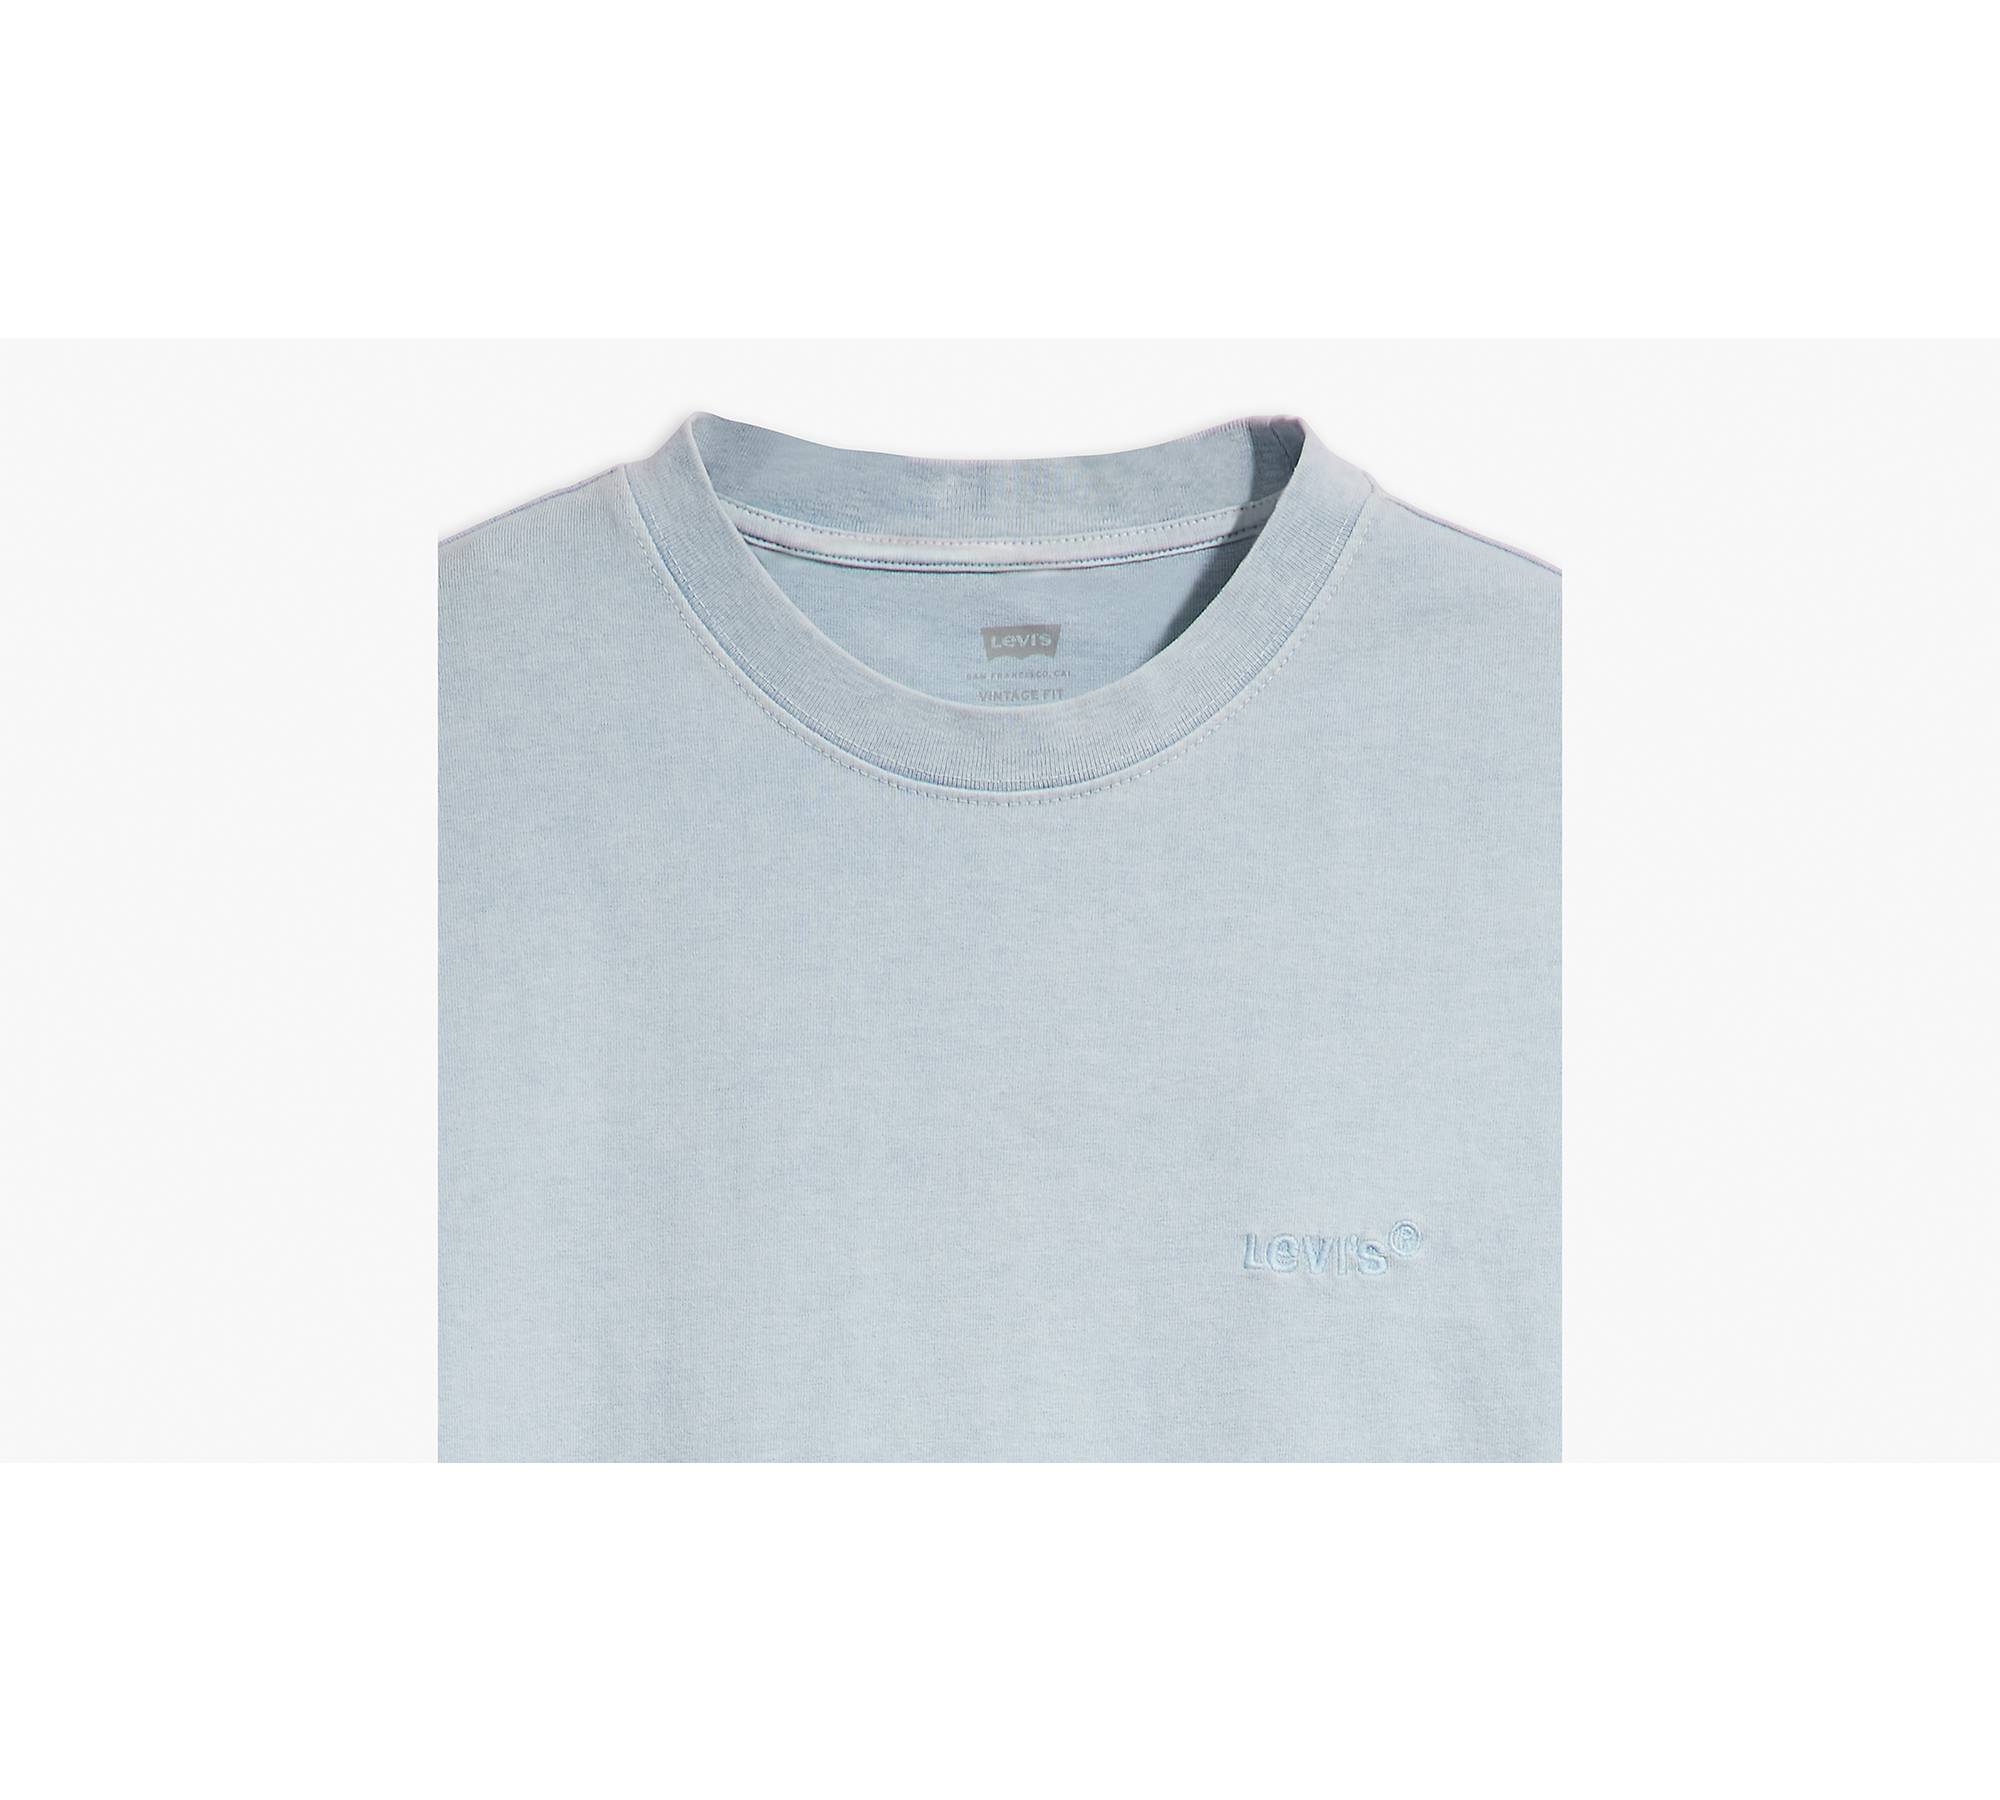 Red Tab™ Vintage T-shirt - Multi-color | Levi's® CA